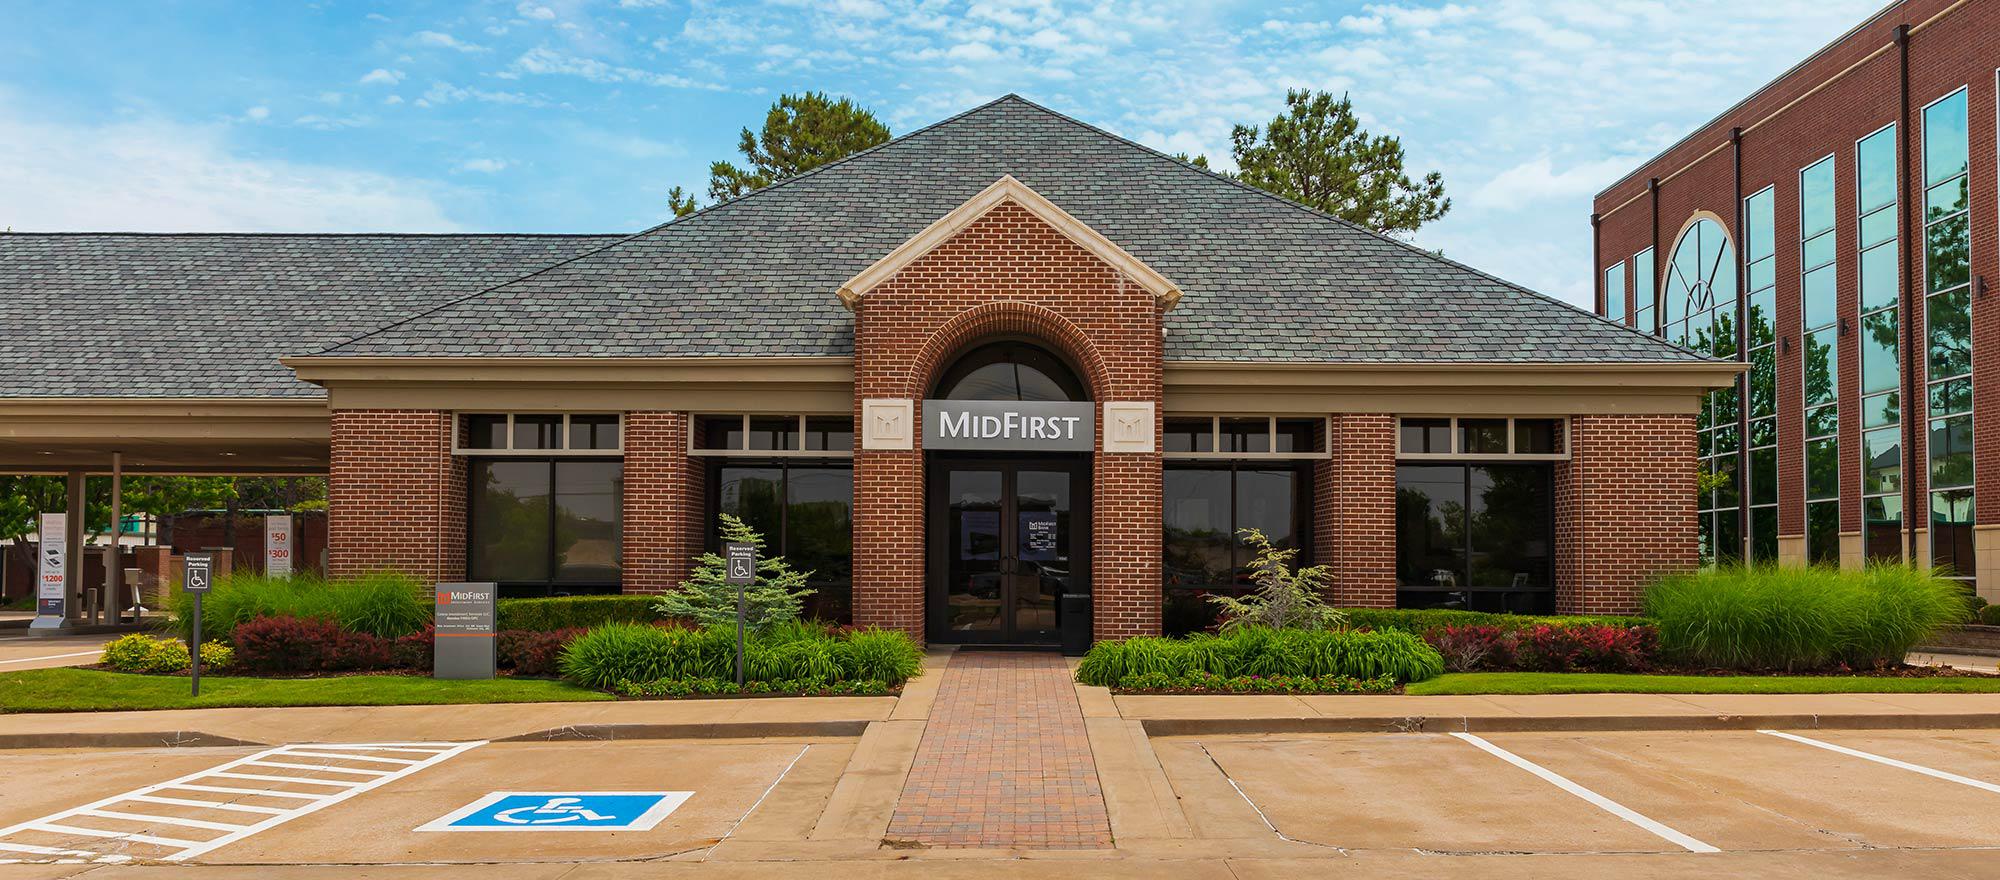 Exterior of MidFirst Bank located at 9139 S Yale in Tulsa, OK.